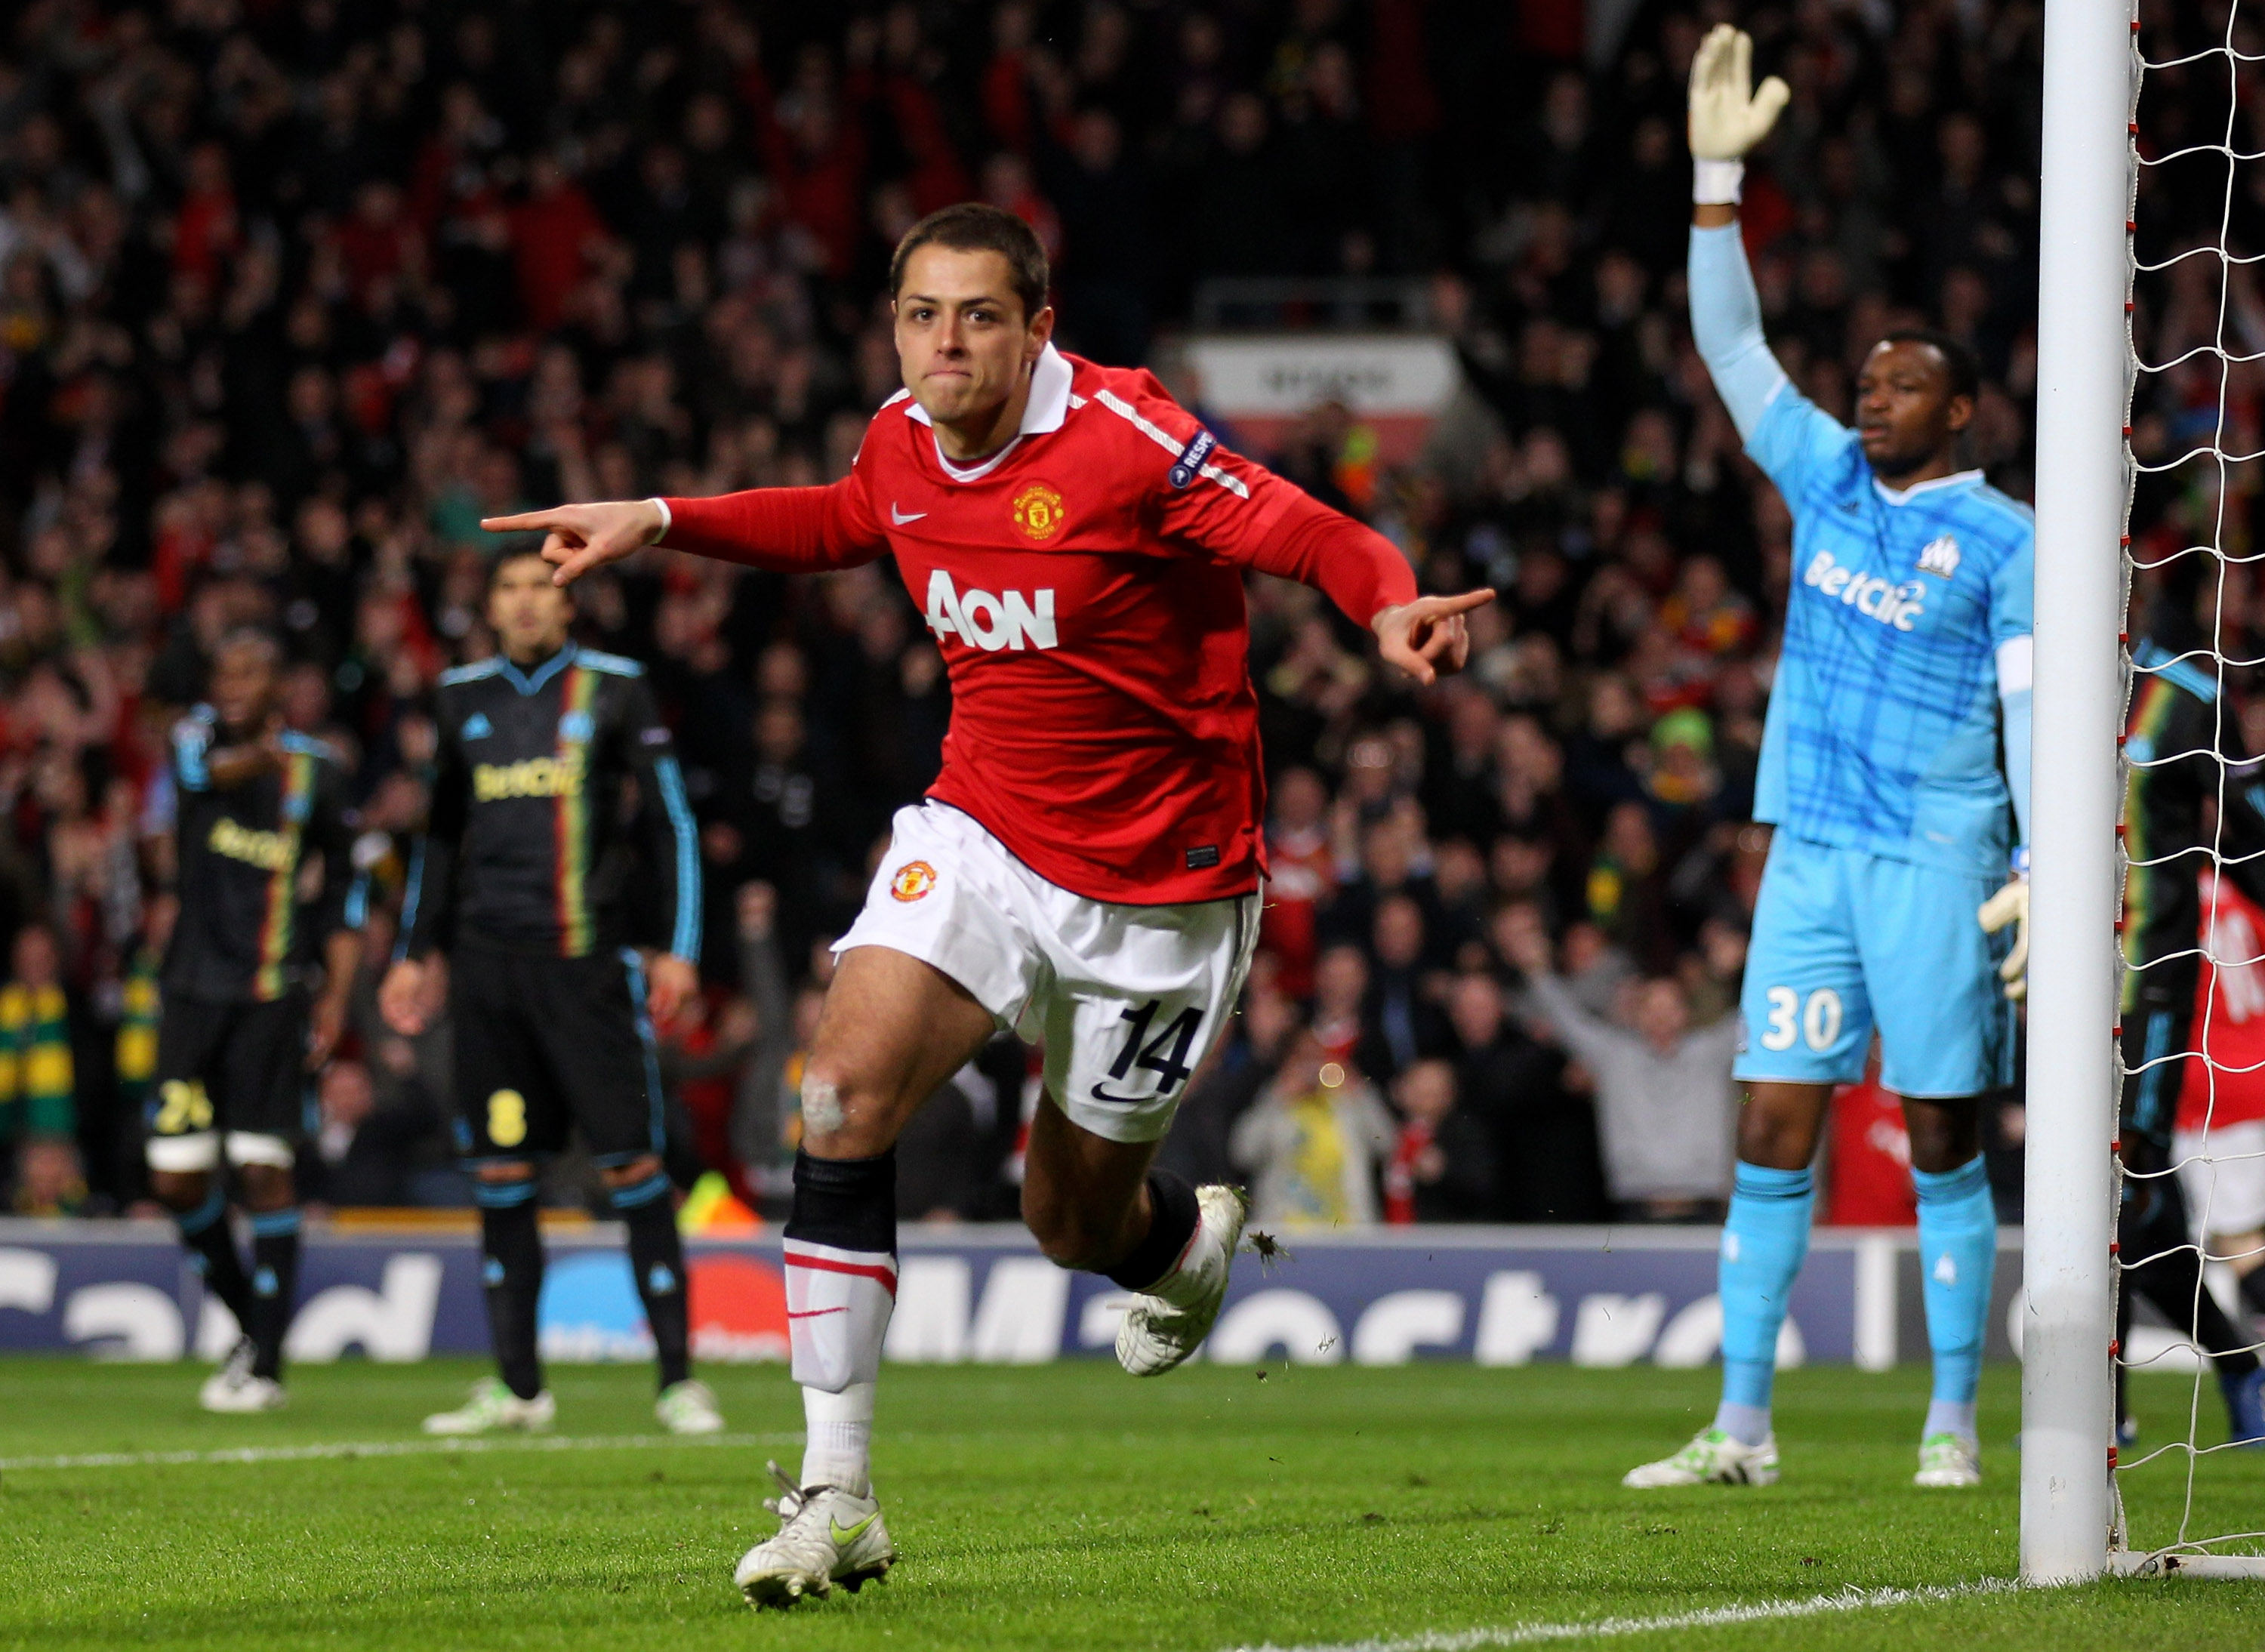 MANCHESTER, ENGLAND - MARCH 15:  Javier Hernandez of Manchester United celebrates scoring the opening goal during the UEFA Champions League round of 16 second leg match between Manchester United and Marseille at Old Trafford on March 15, 2011 in Mancheste